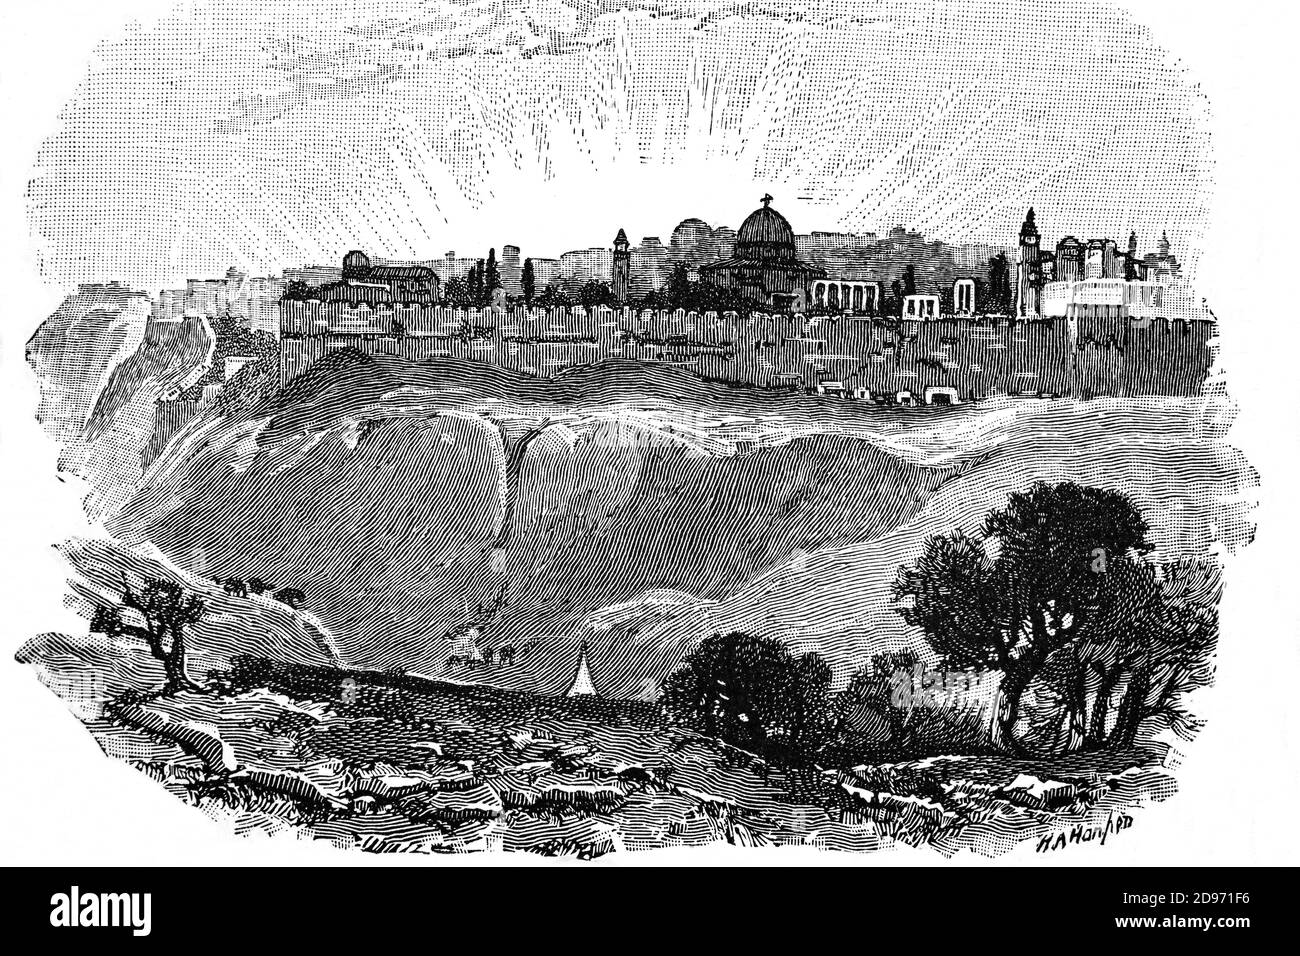 A late 19th Century view from the Mount of Olives of Jerusalem built on a plateau in the Judaean Mountains between the Mediterranean and the Dead Sea. It is one of the oldest cities in the world, and is considered holy to the three major Abrahamic religions—Judaism, Christianity, and Islam. Stock Photo